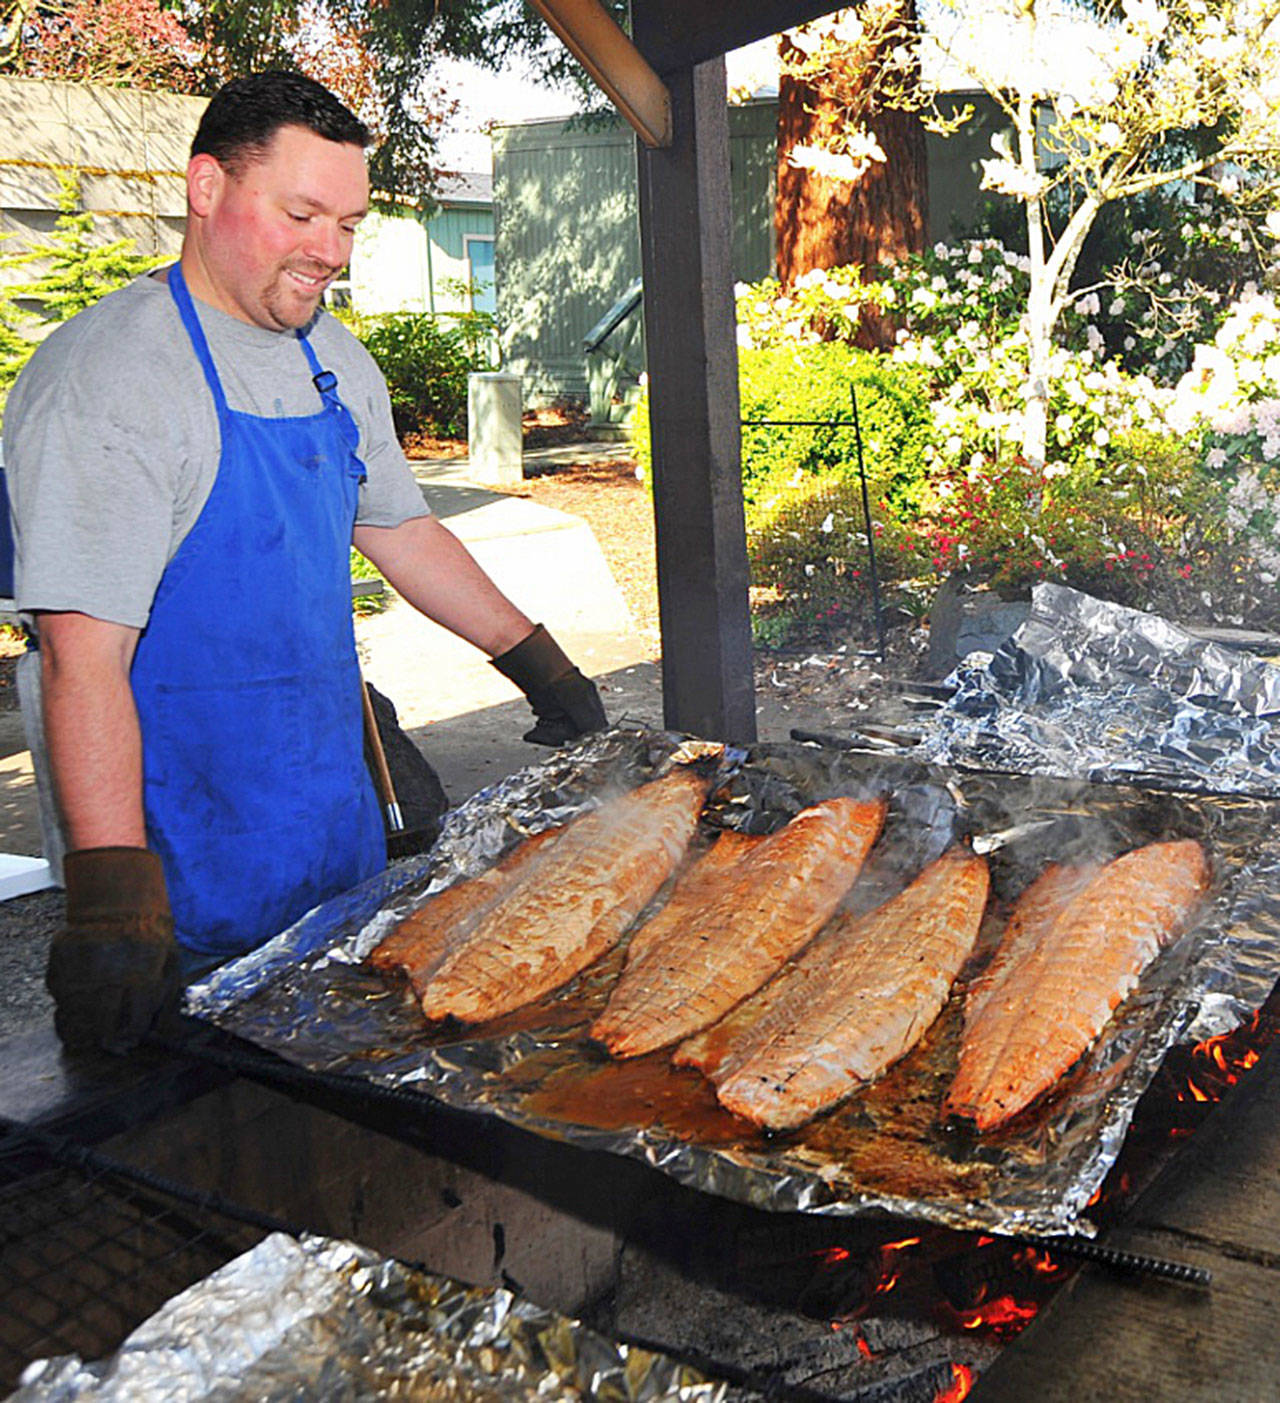 A Rotary Club member prepares wild salmon for guests. Photo courtesy of Rotary Club of Sequim